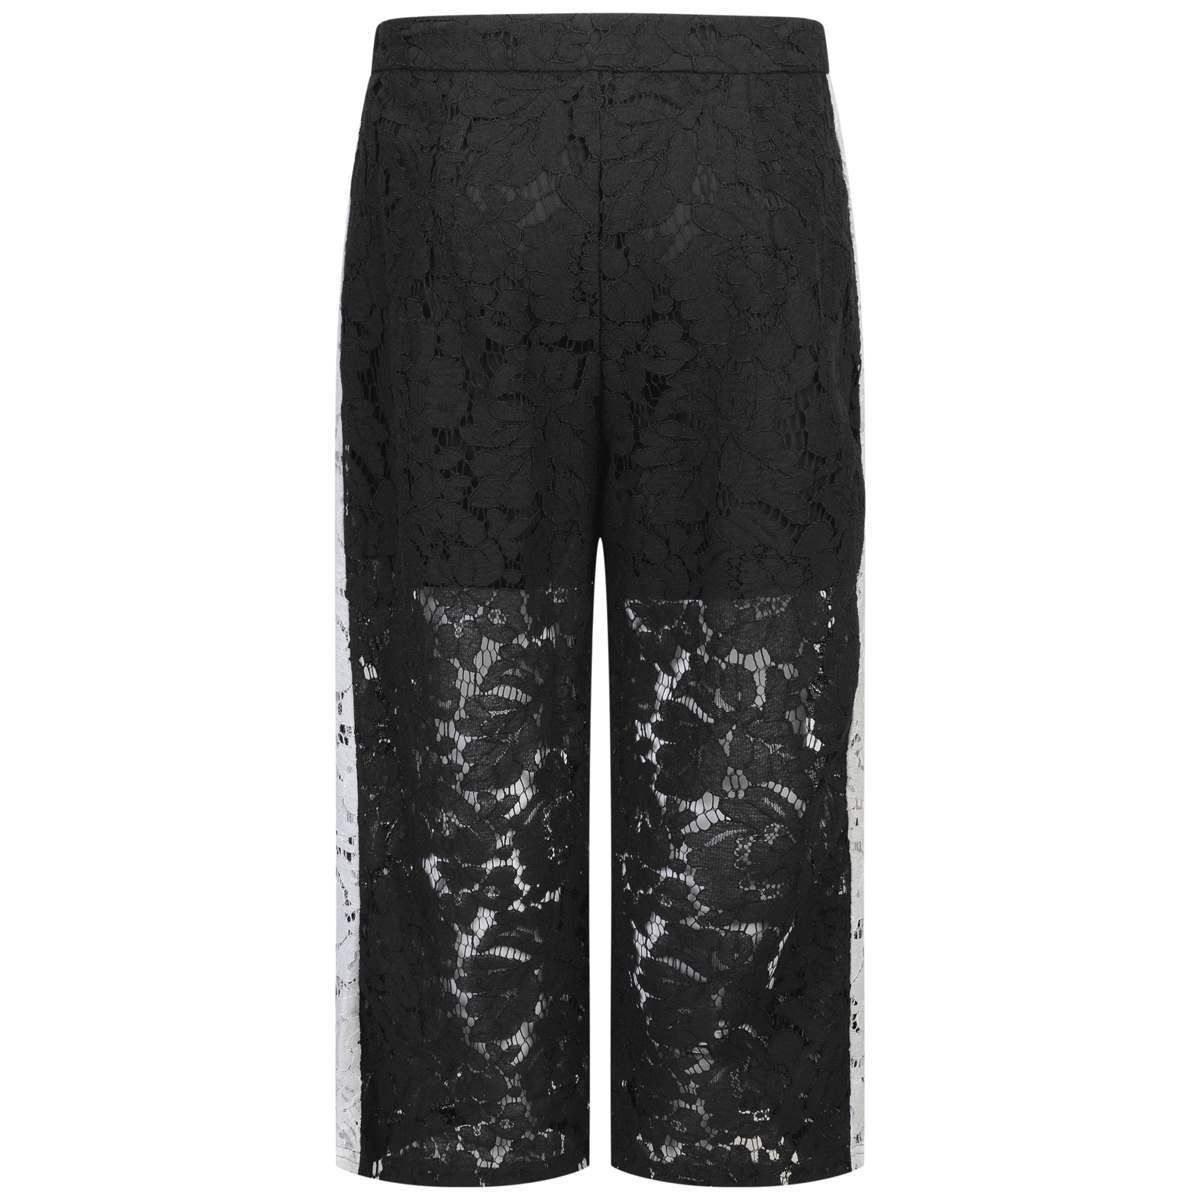 Black lace trousers with an interior adjustable, white panels on the seams, a button and fly zip closure. Made in China.